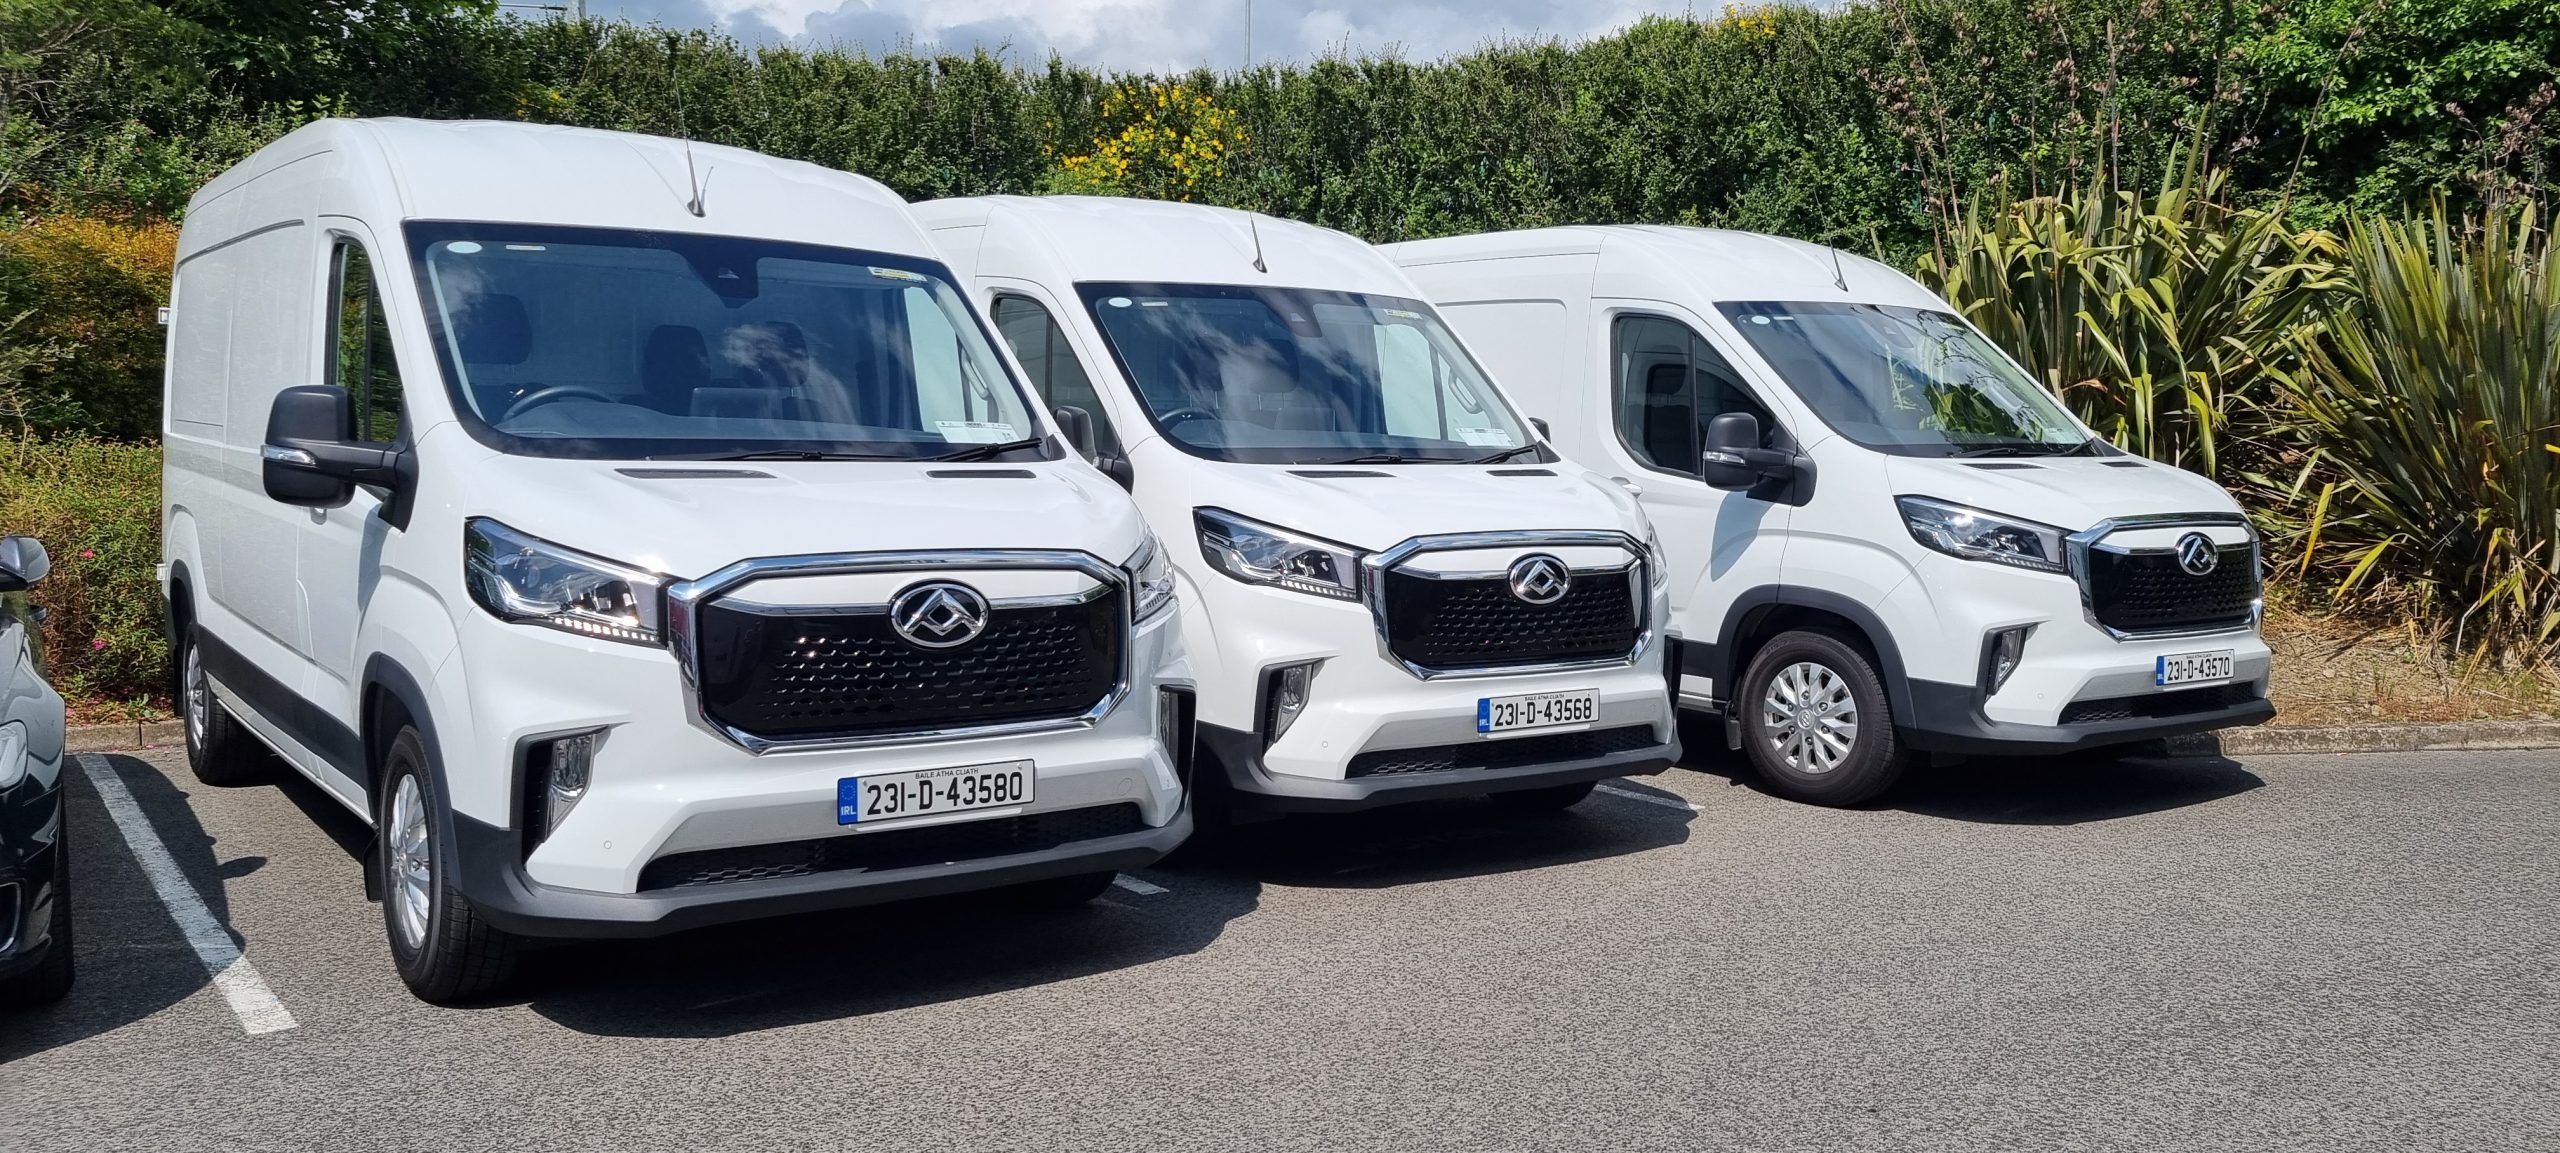 Introducing our New Electric Fleet